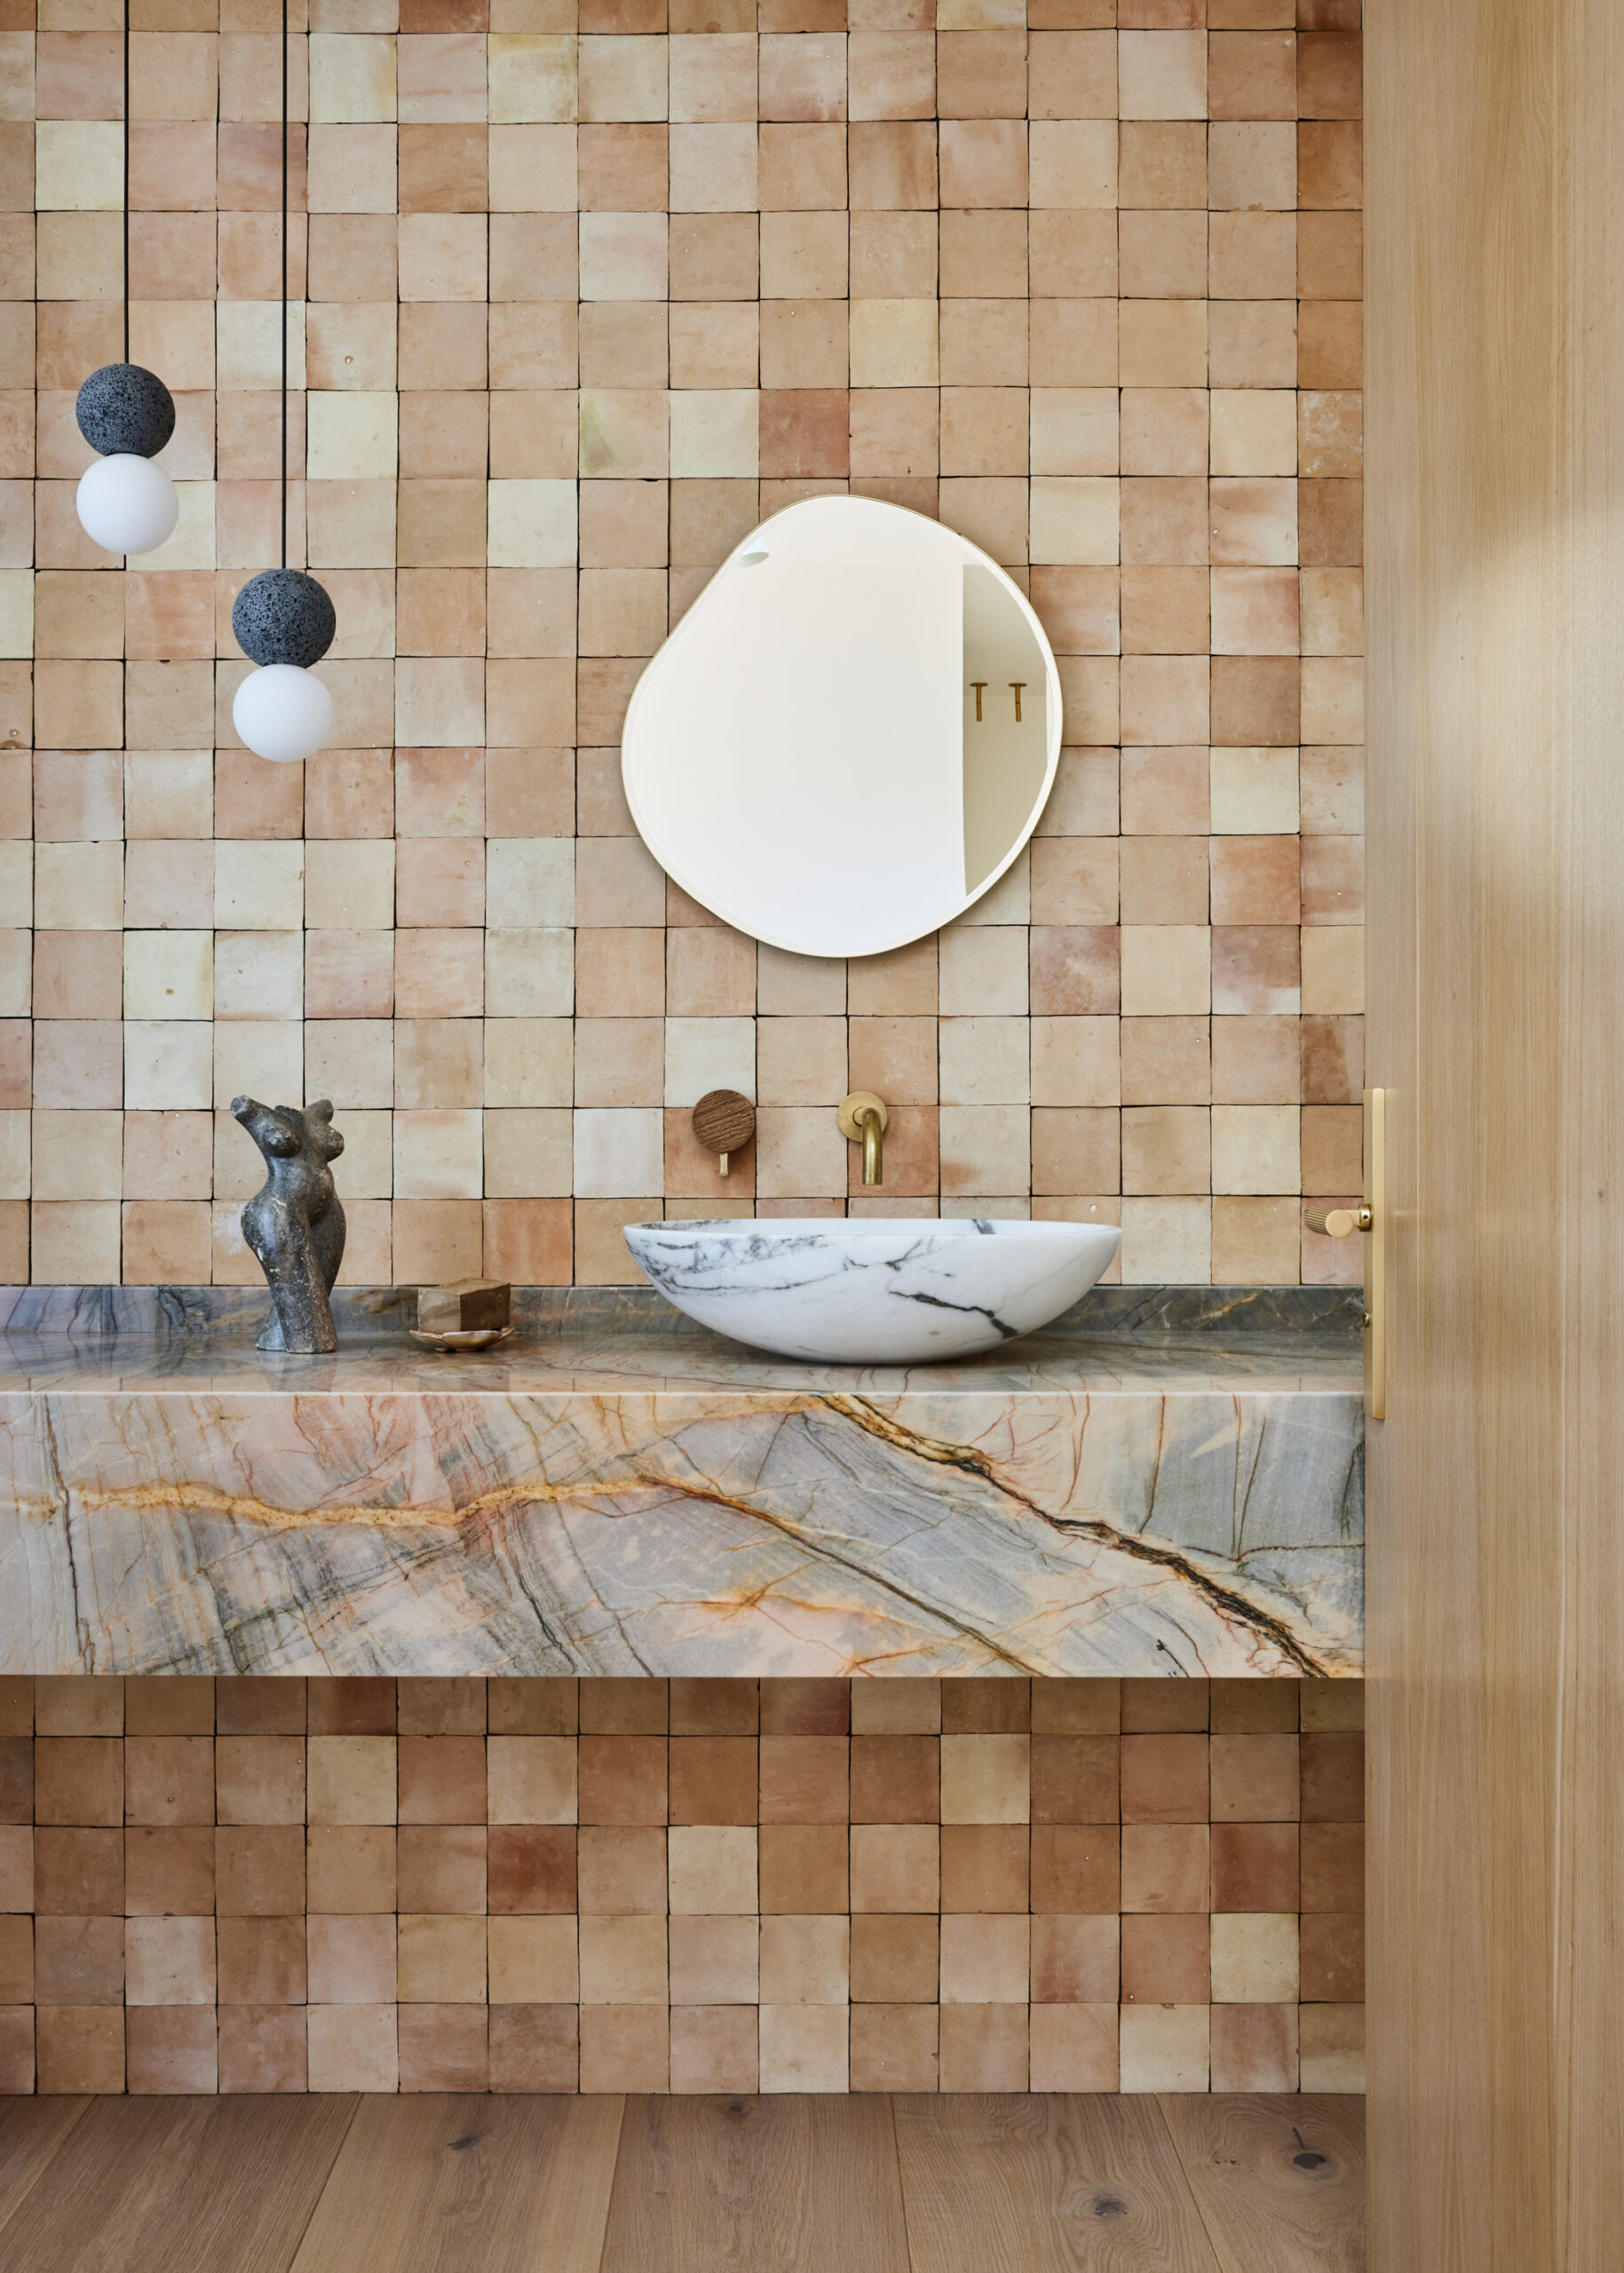 This bathroom is stunningly rich in shapes and texture. (Nicole Franzen)